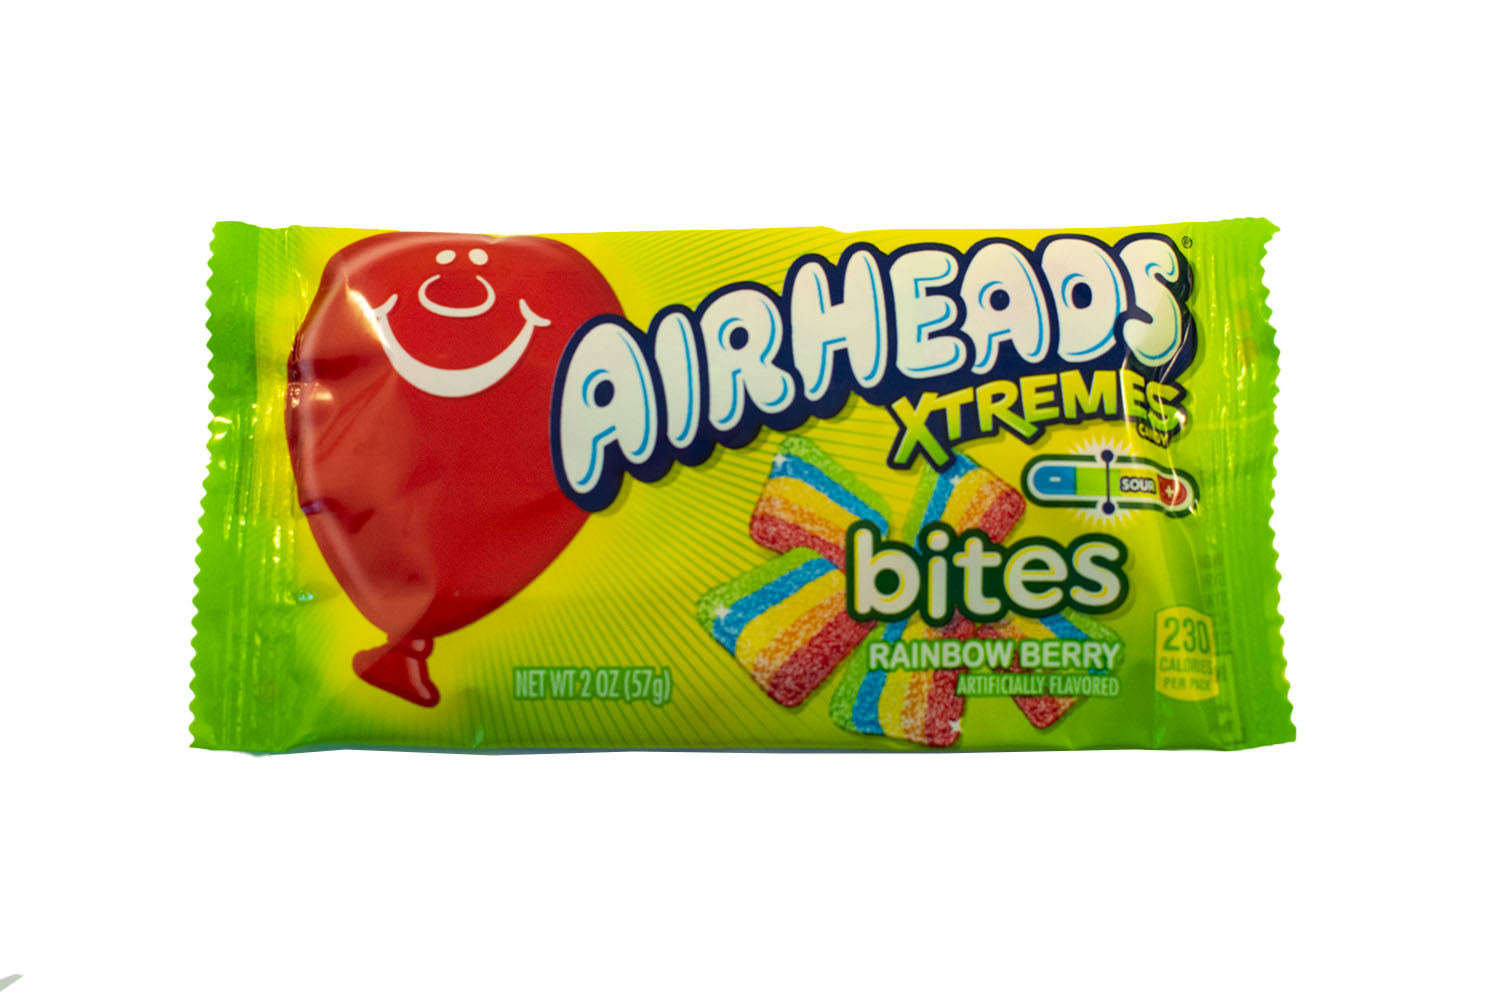 AirHeads Xtremes Bites - Sour Rainbow Berry